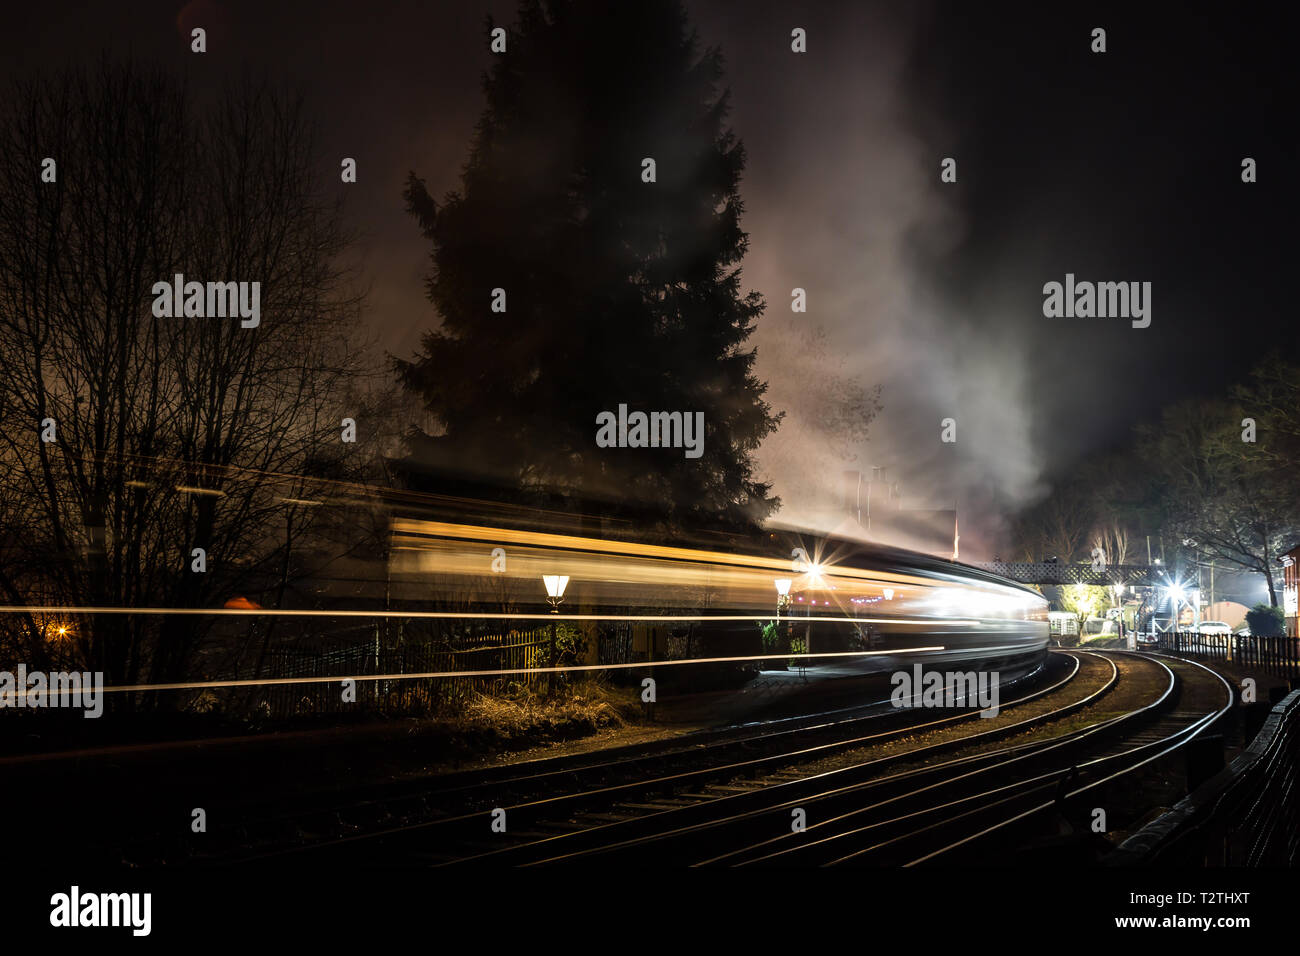 Atmospheric moving steam train & carriages travelling through vintage railway station at night in the dark. Fast movement motion blur. Concept speed. Stock Photo